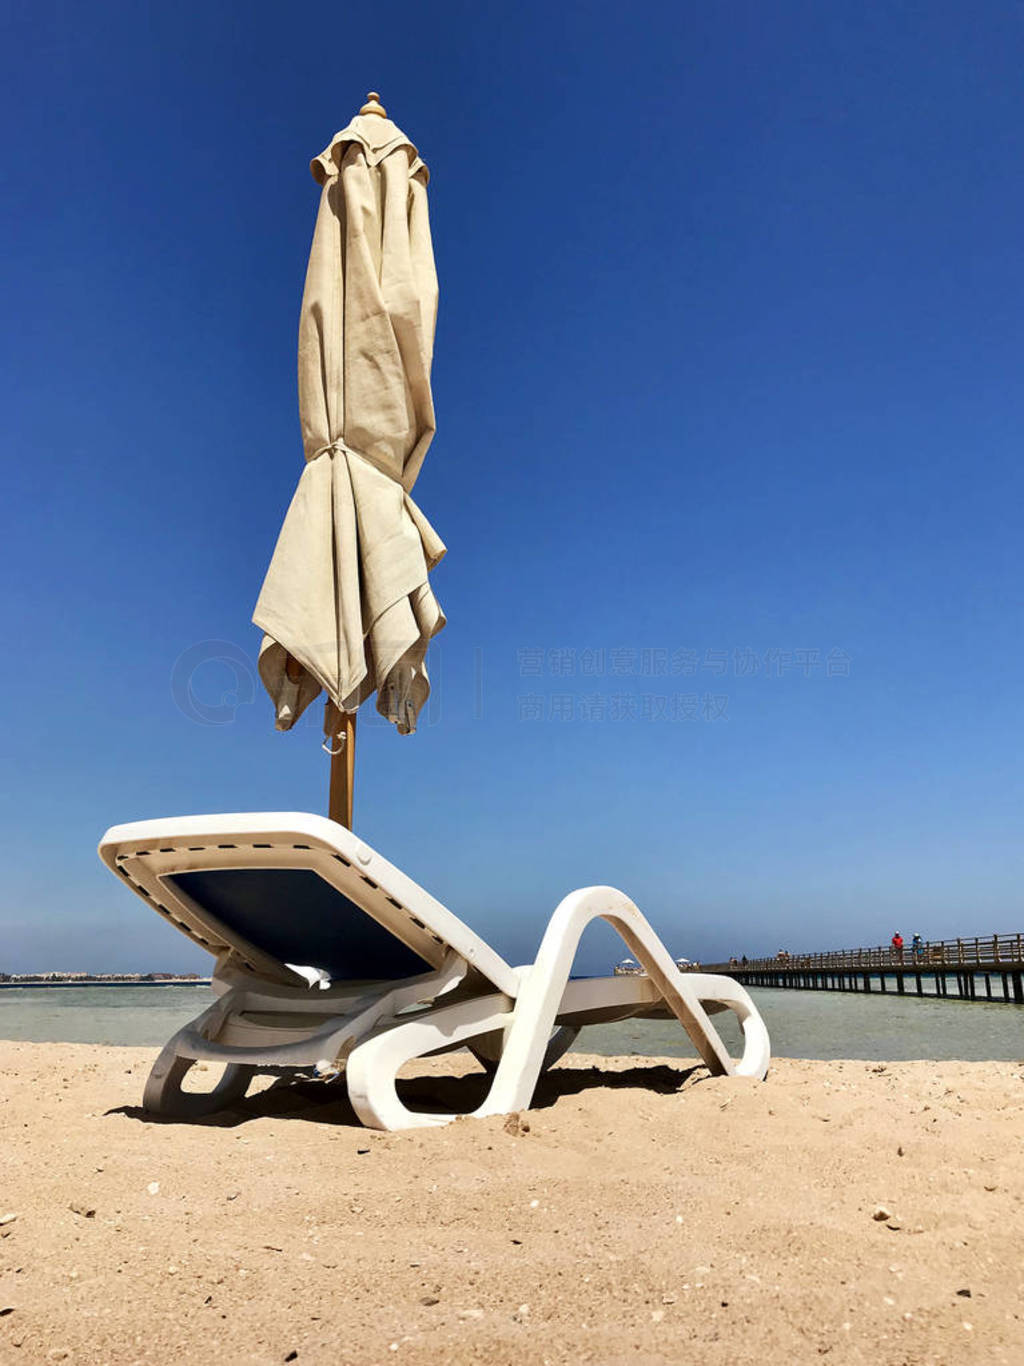 Stylish lounger in yellow sand to sun sunbed on beach in summer